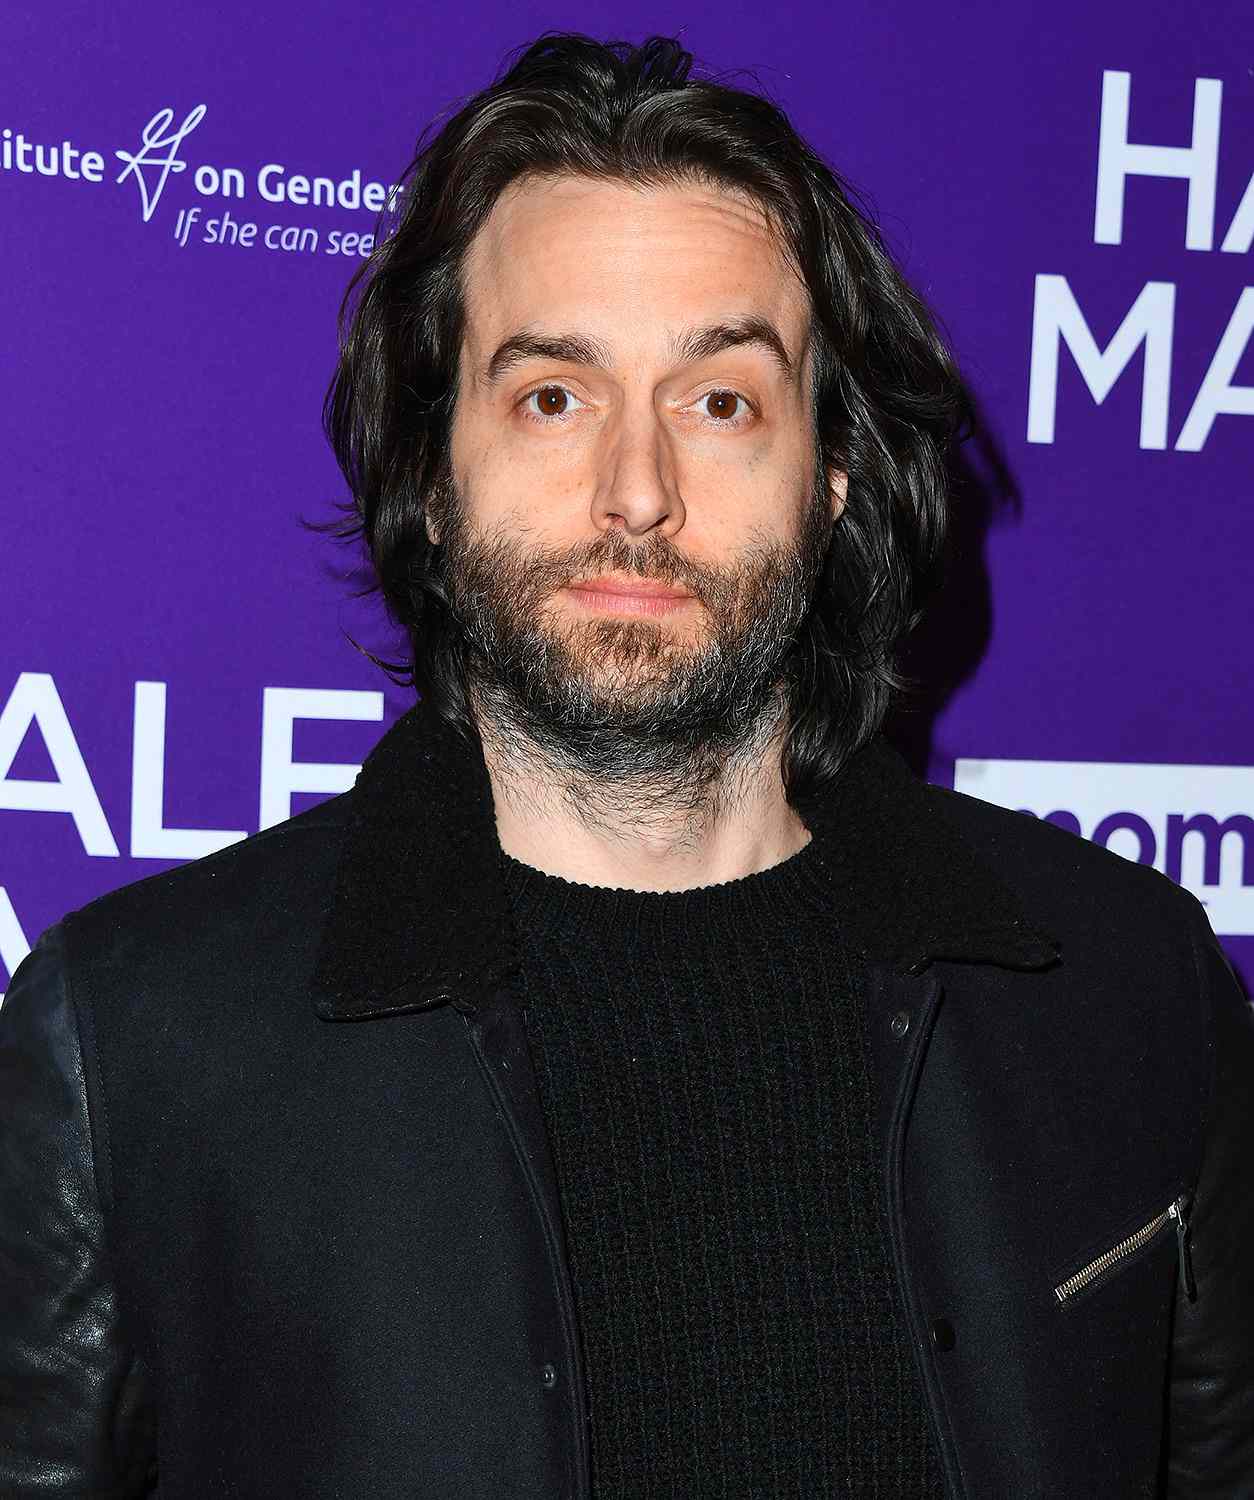 Chris D Elia Accused Of Sexually Pursuing Underage Girls Online People Com